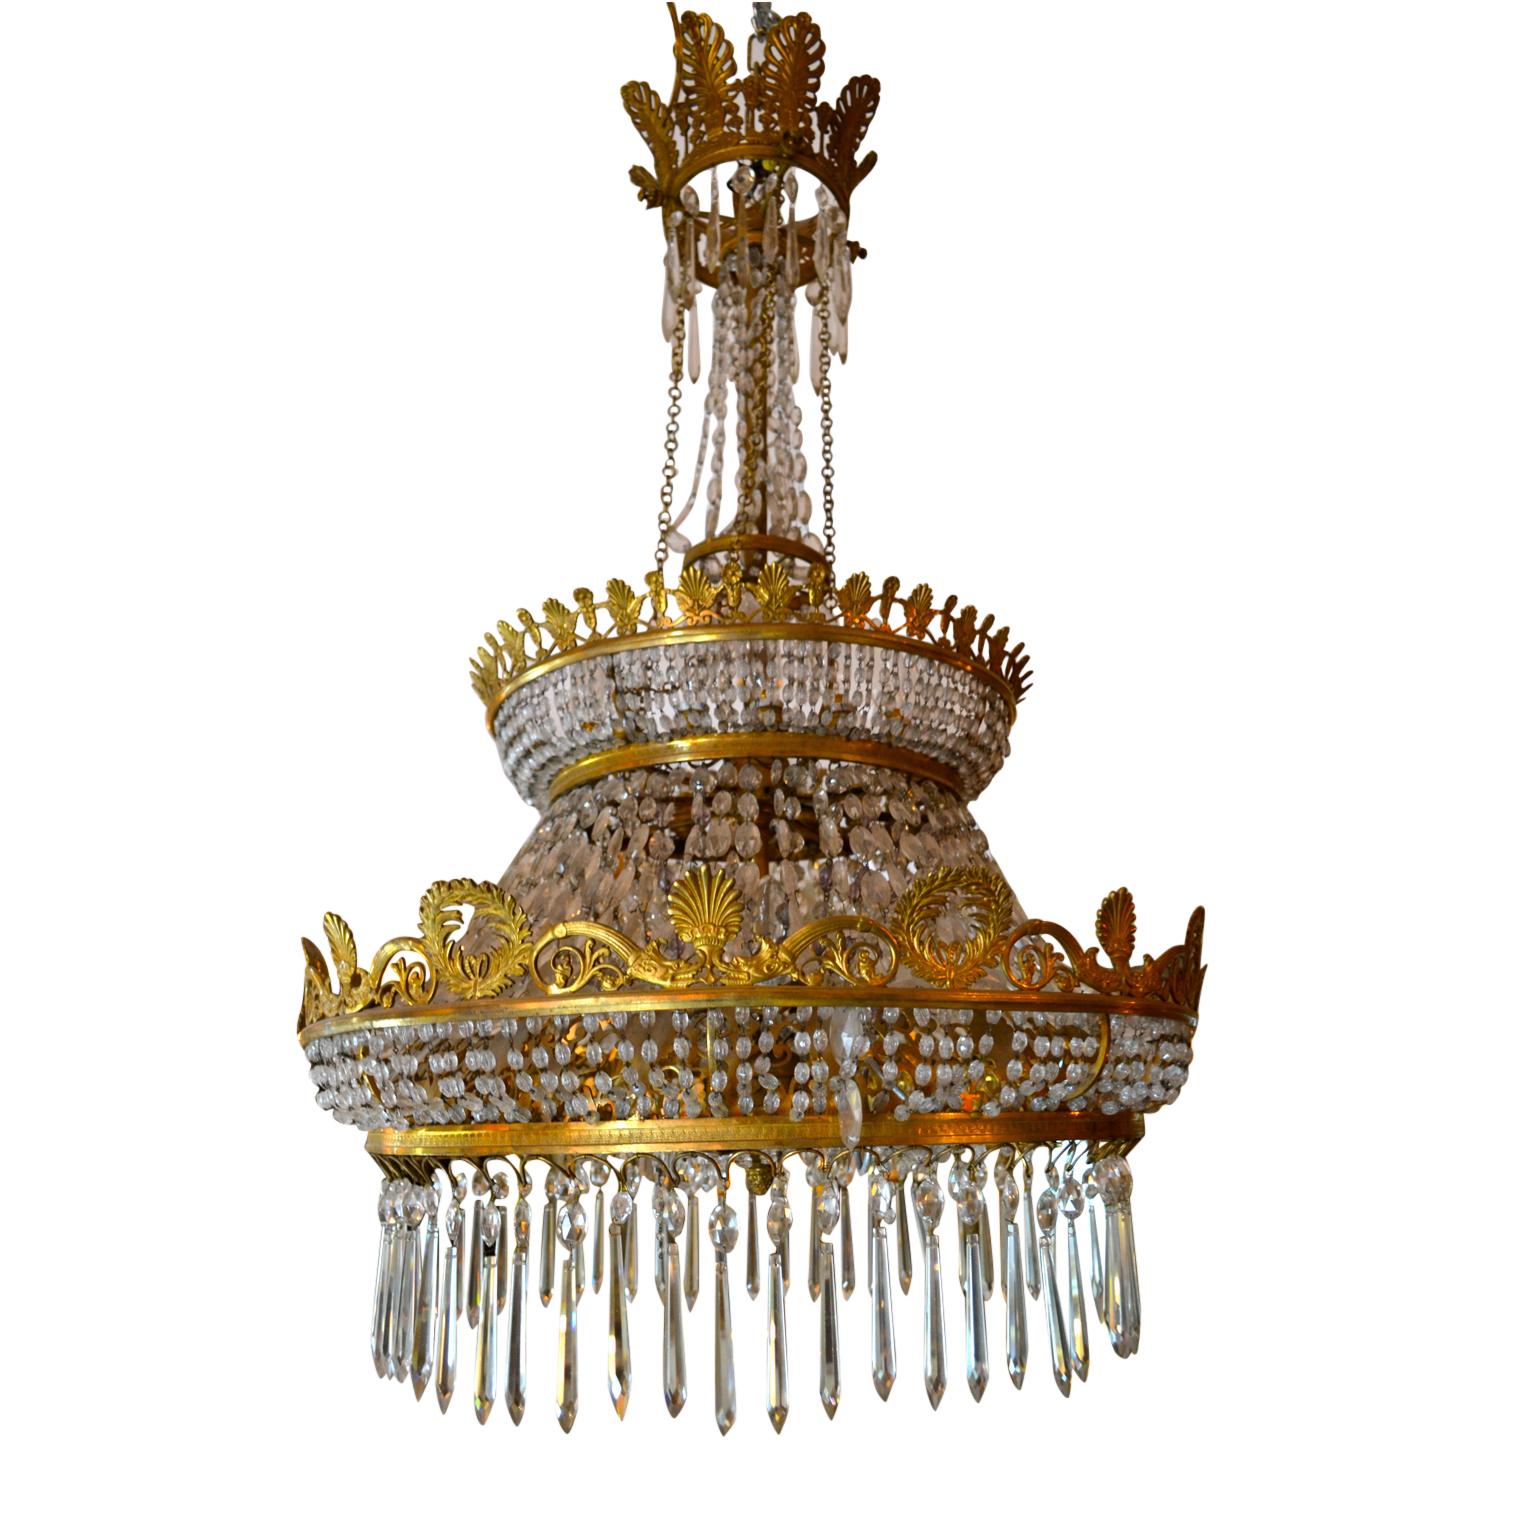 An empire style chandelier in gilded bronze and cut crystal. The large central ring is embellished with palmettes and wreaths and supports beaded chains and long crystal French drops. The underside of the ring is star shaped and woven with crystal